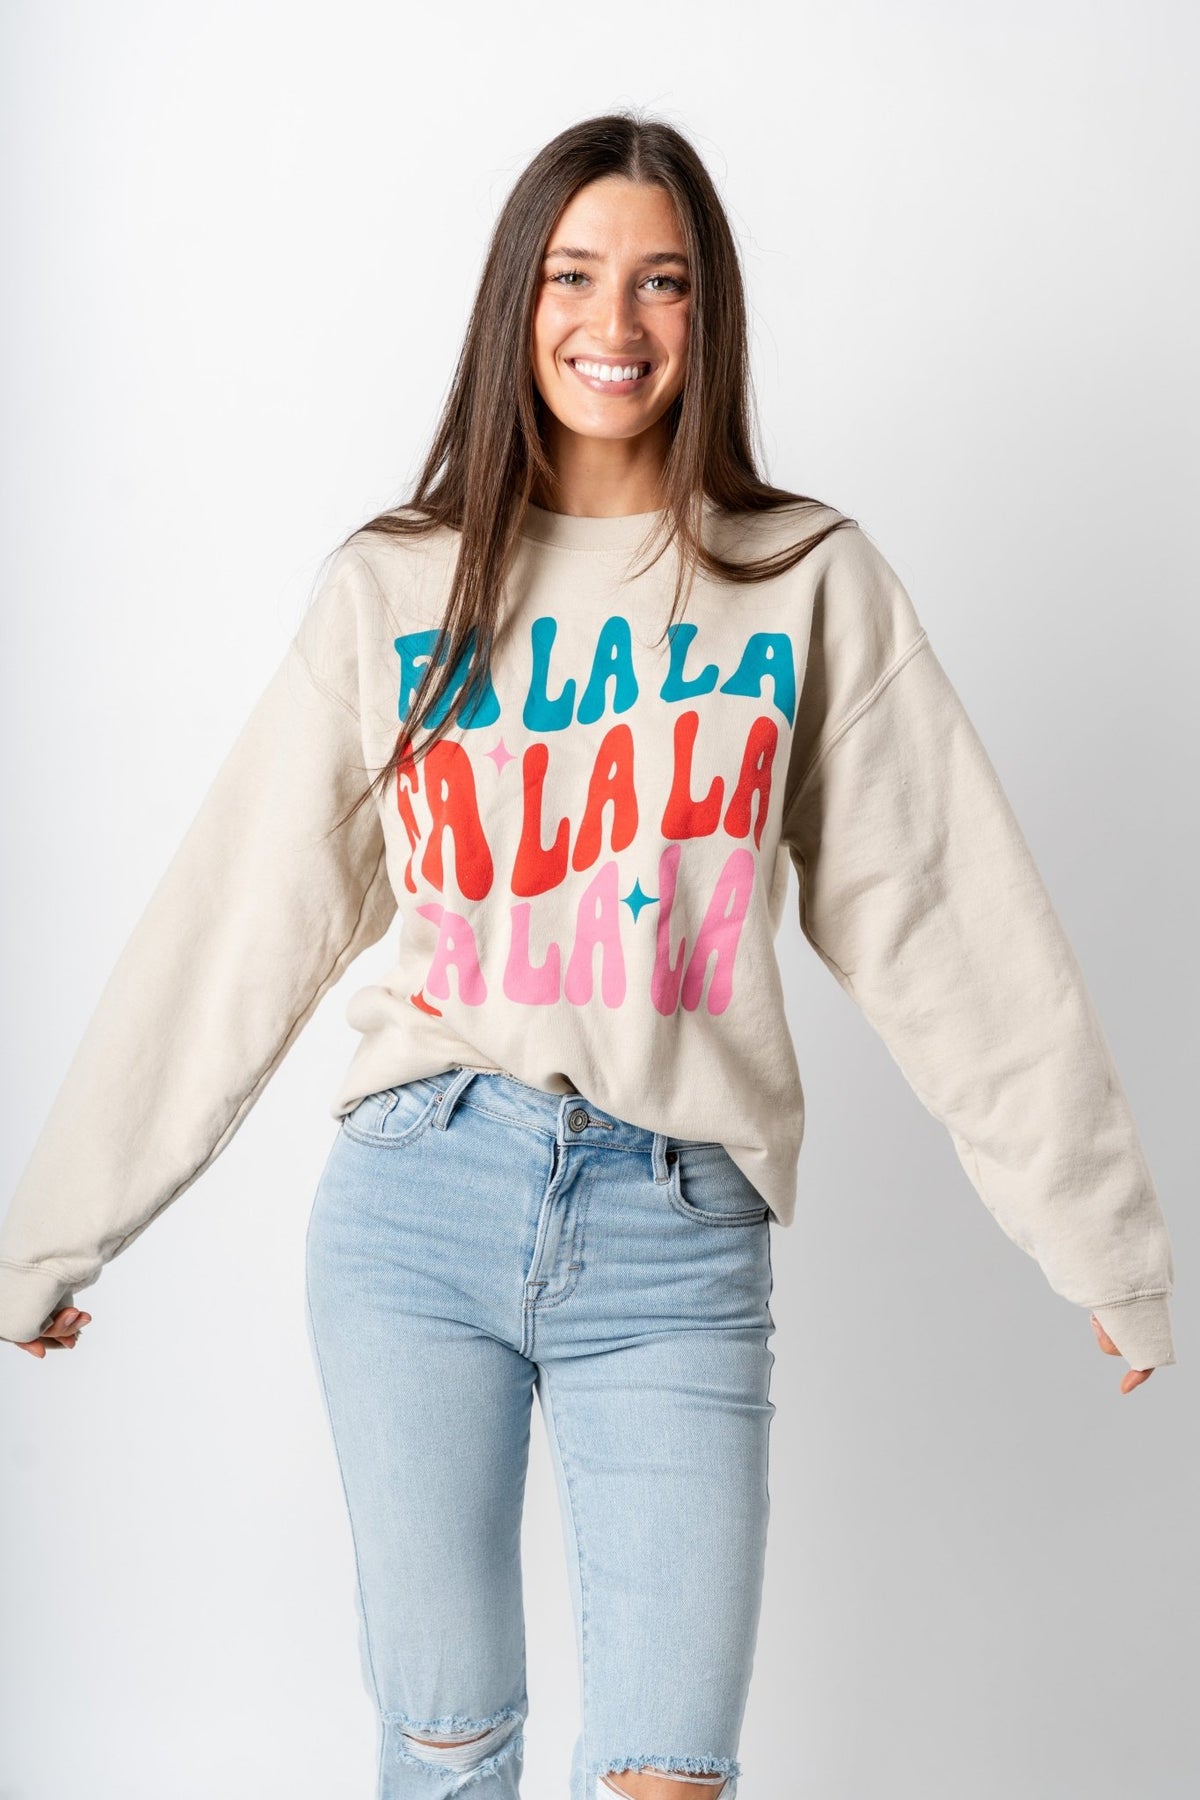 Falala repeater thrifted sweatshirt sand - Trendy Holiday Apparel at Lush Fashion Lounge Boutique in Oklahoma City